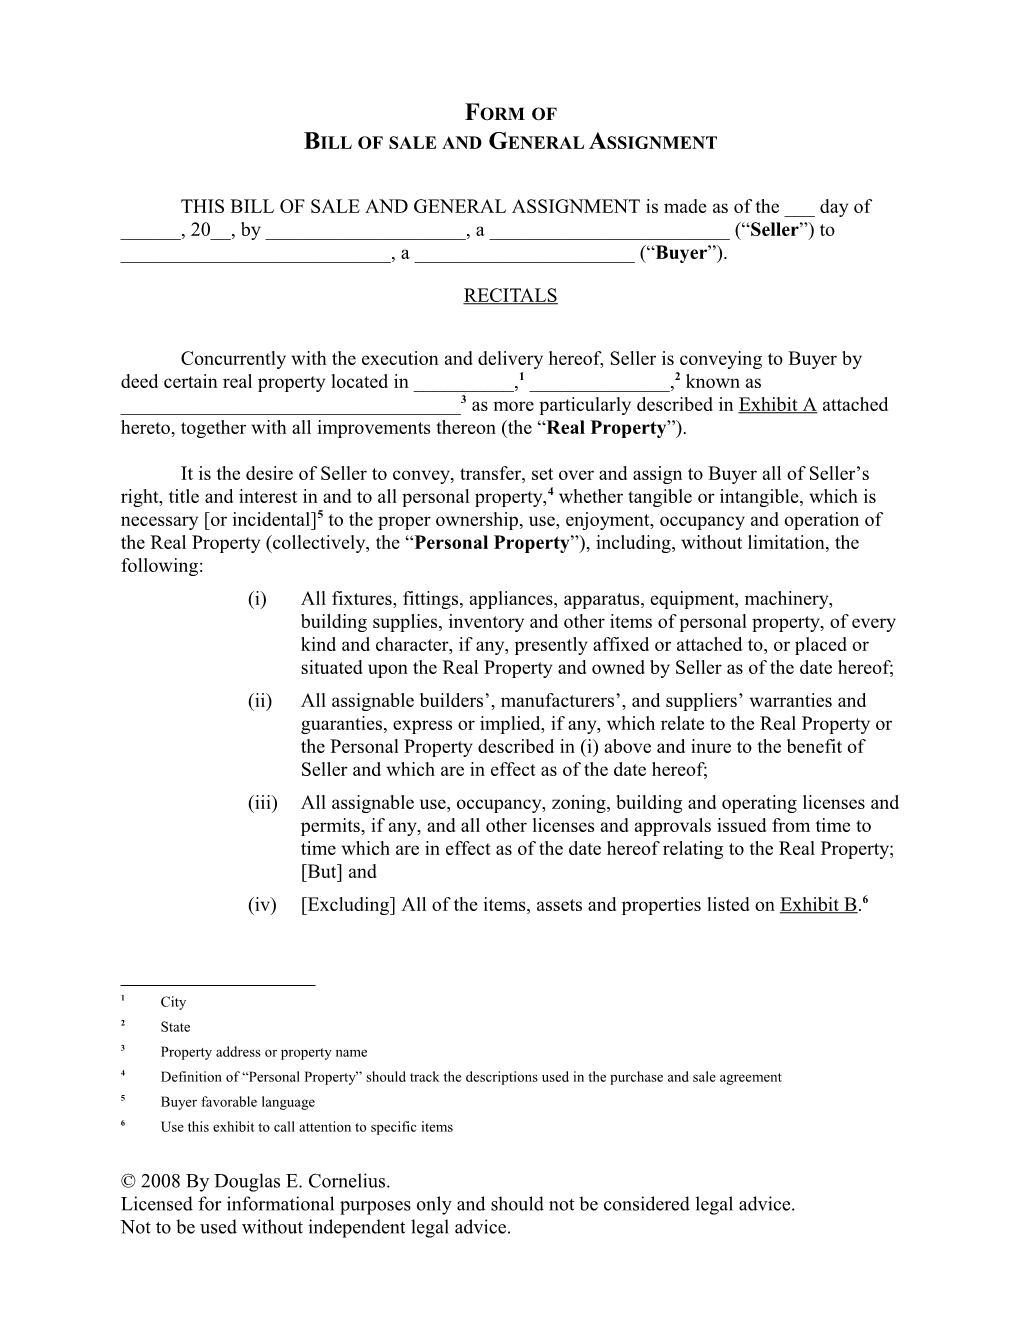 Bill of Sale and Assignment and Assumption of Contracts